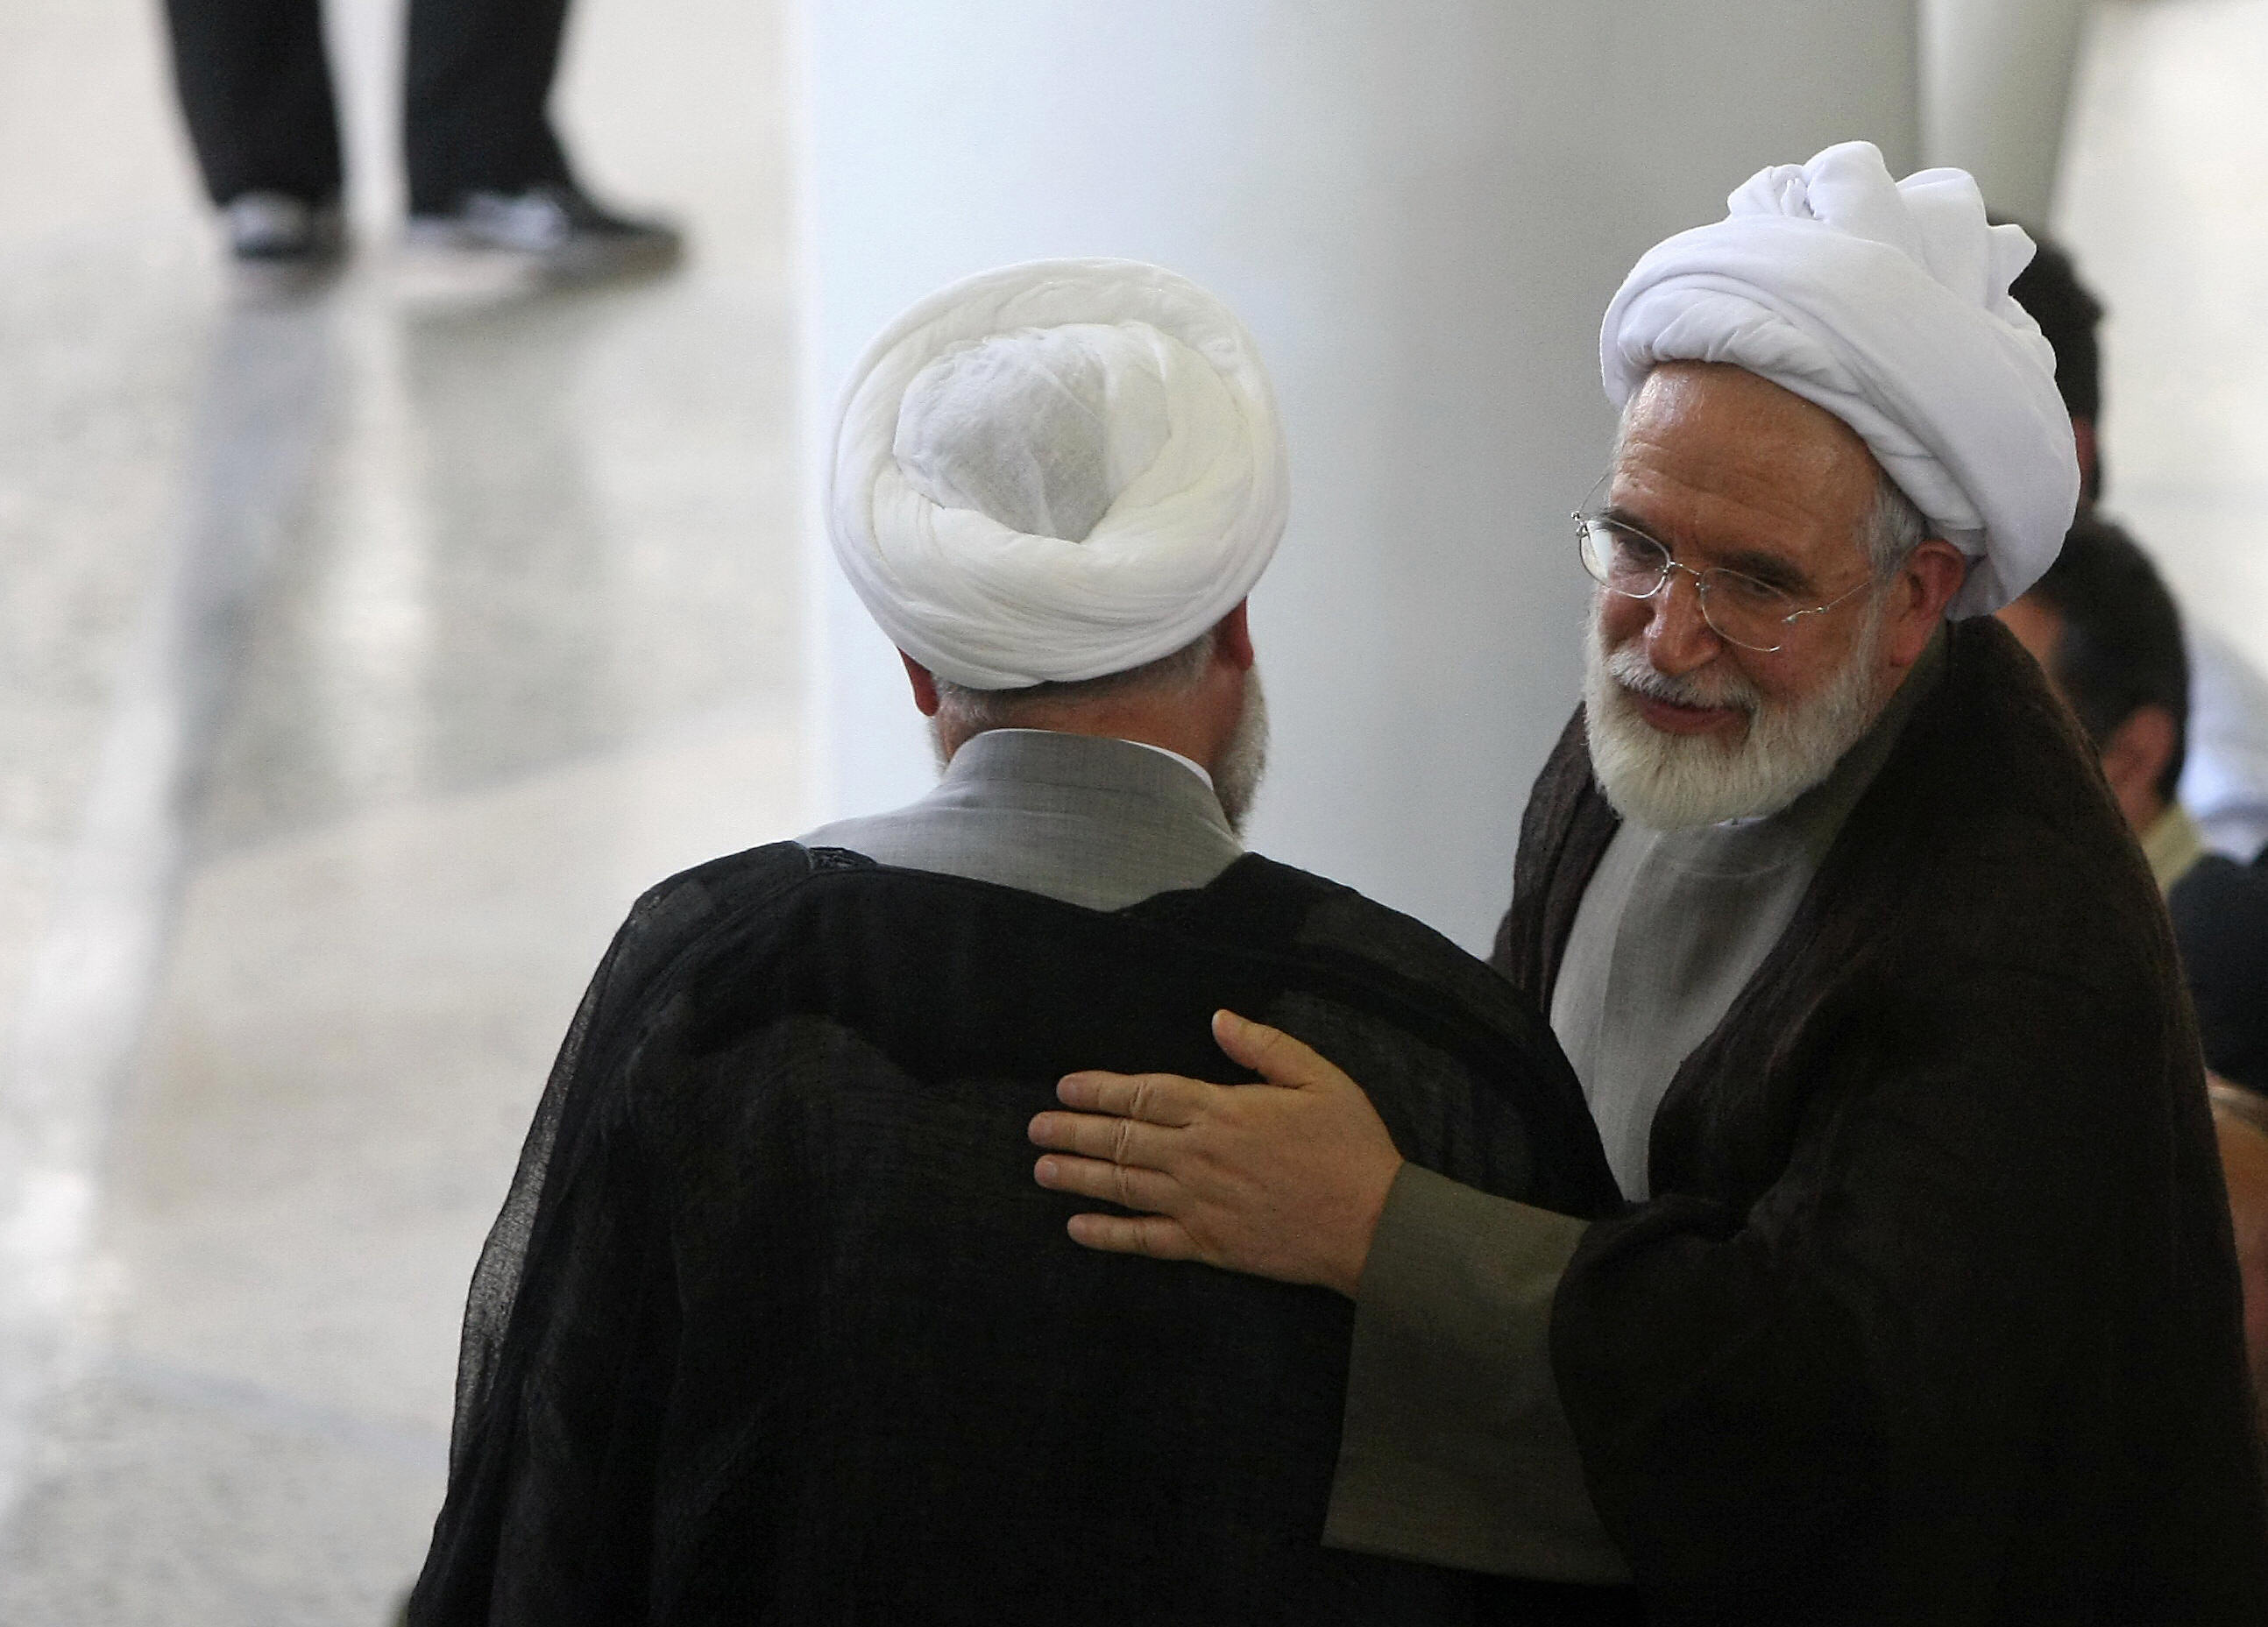 Iranian defeated presidential candidate Mehdi Karroubi (R) speaks with an unidentified cleric following Friday prayers at Tehran University in the Iranian capital on July 17, 2009. (Getty Images)